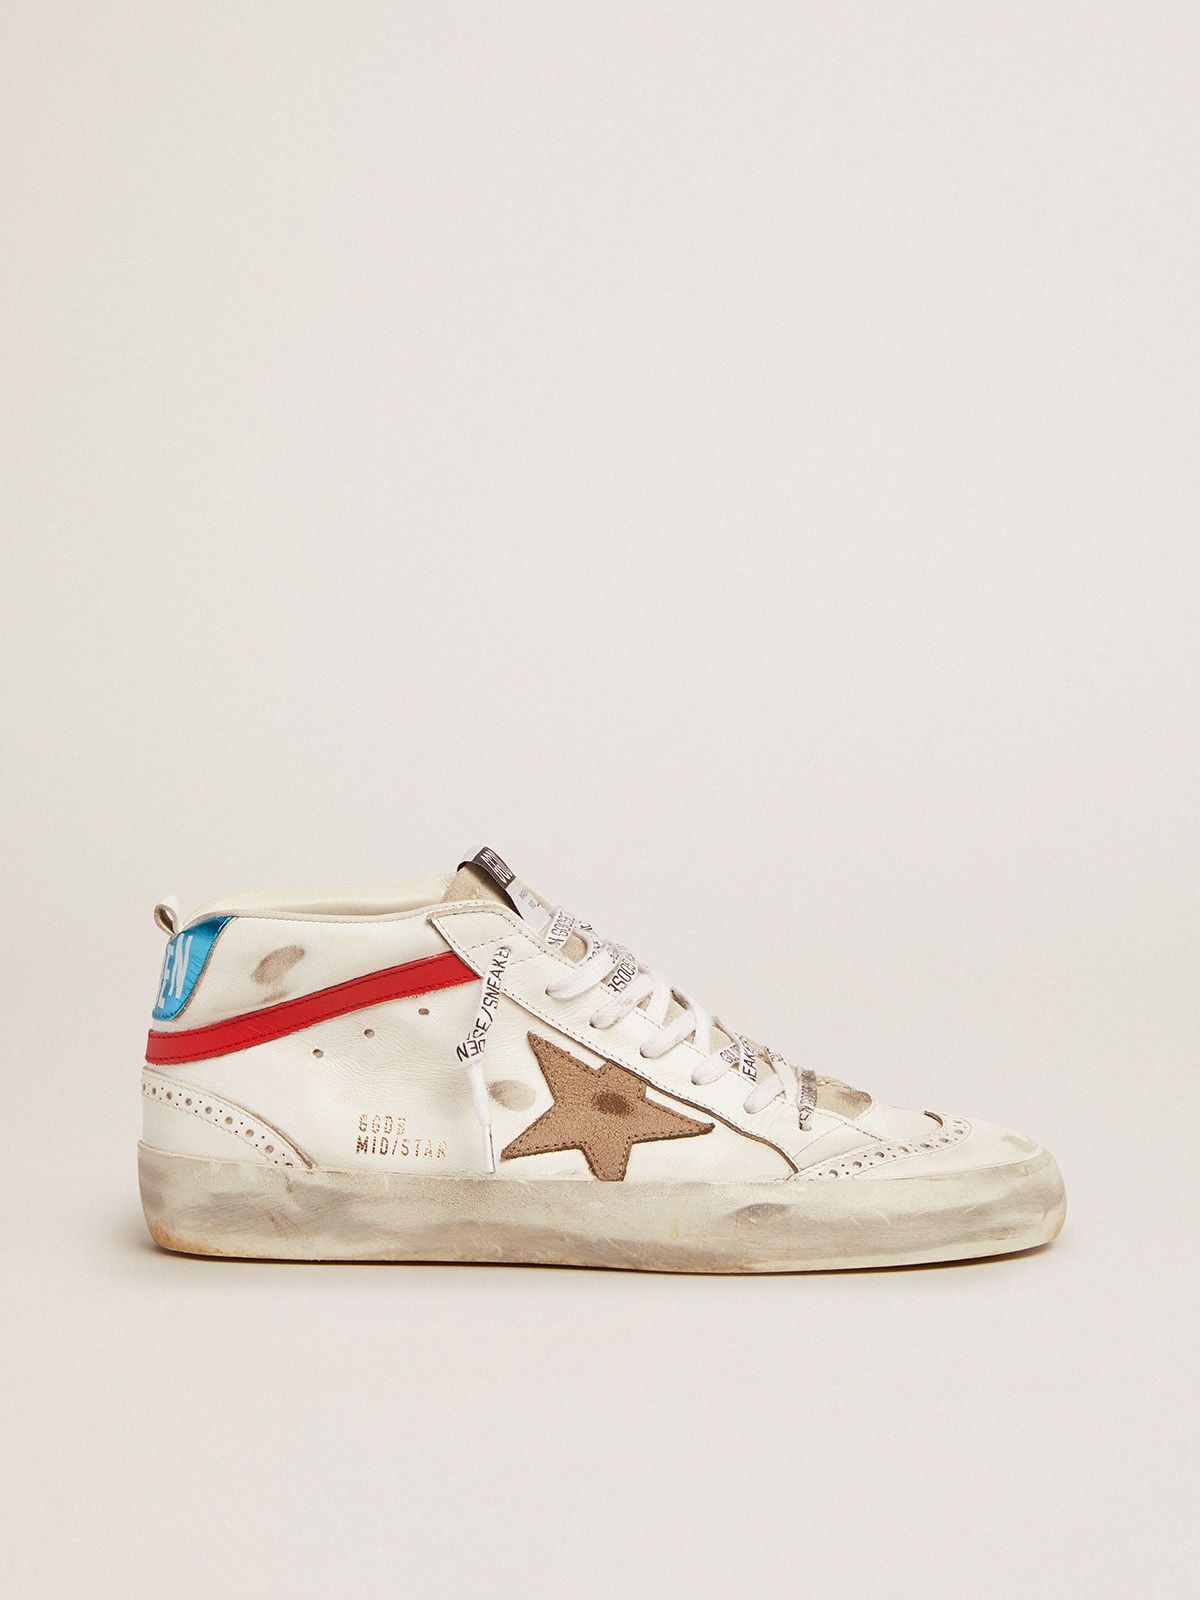 Golden Goose Sconto Uomo Mid Star sneakers with metallic blue heel tab and star in khaki crackled leather